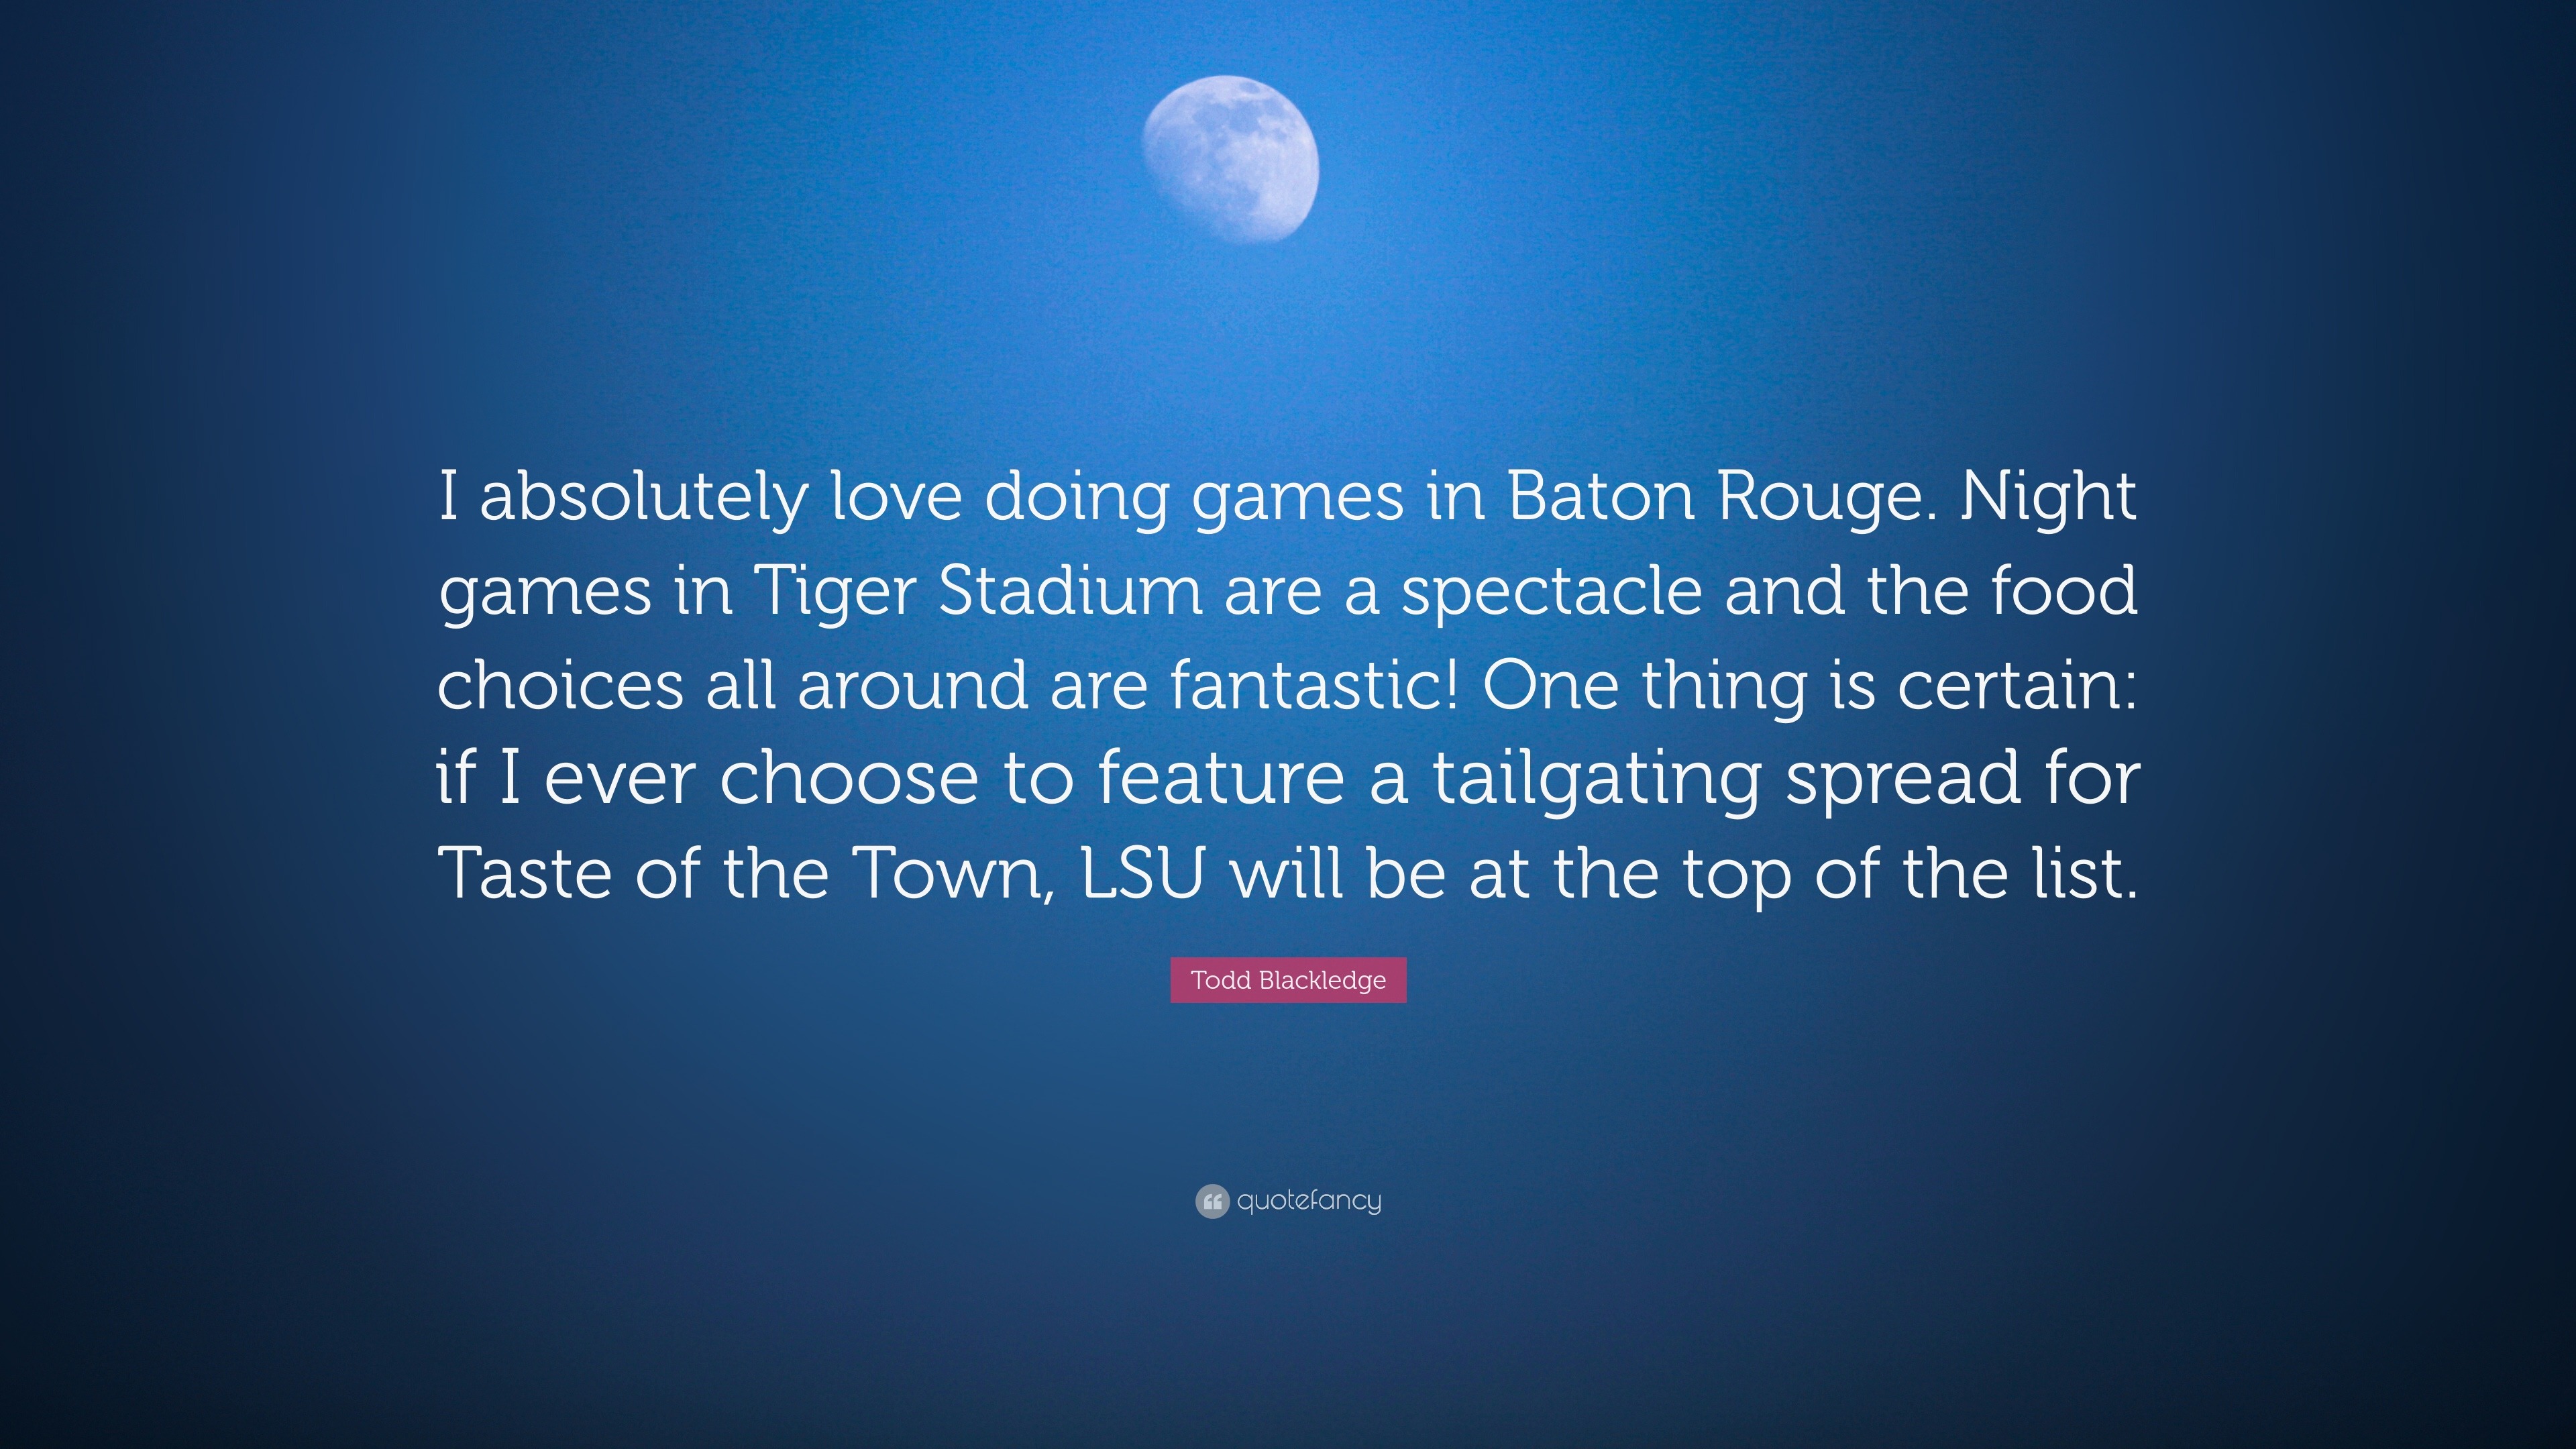 Todd Blackledge Quote: “I absolutely love doing games in Baton Rouge. Night  games in Tiger Stadium are a spectacle and the food choices all arou”